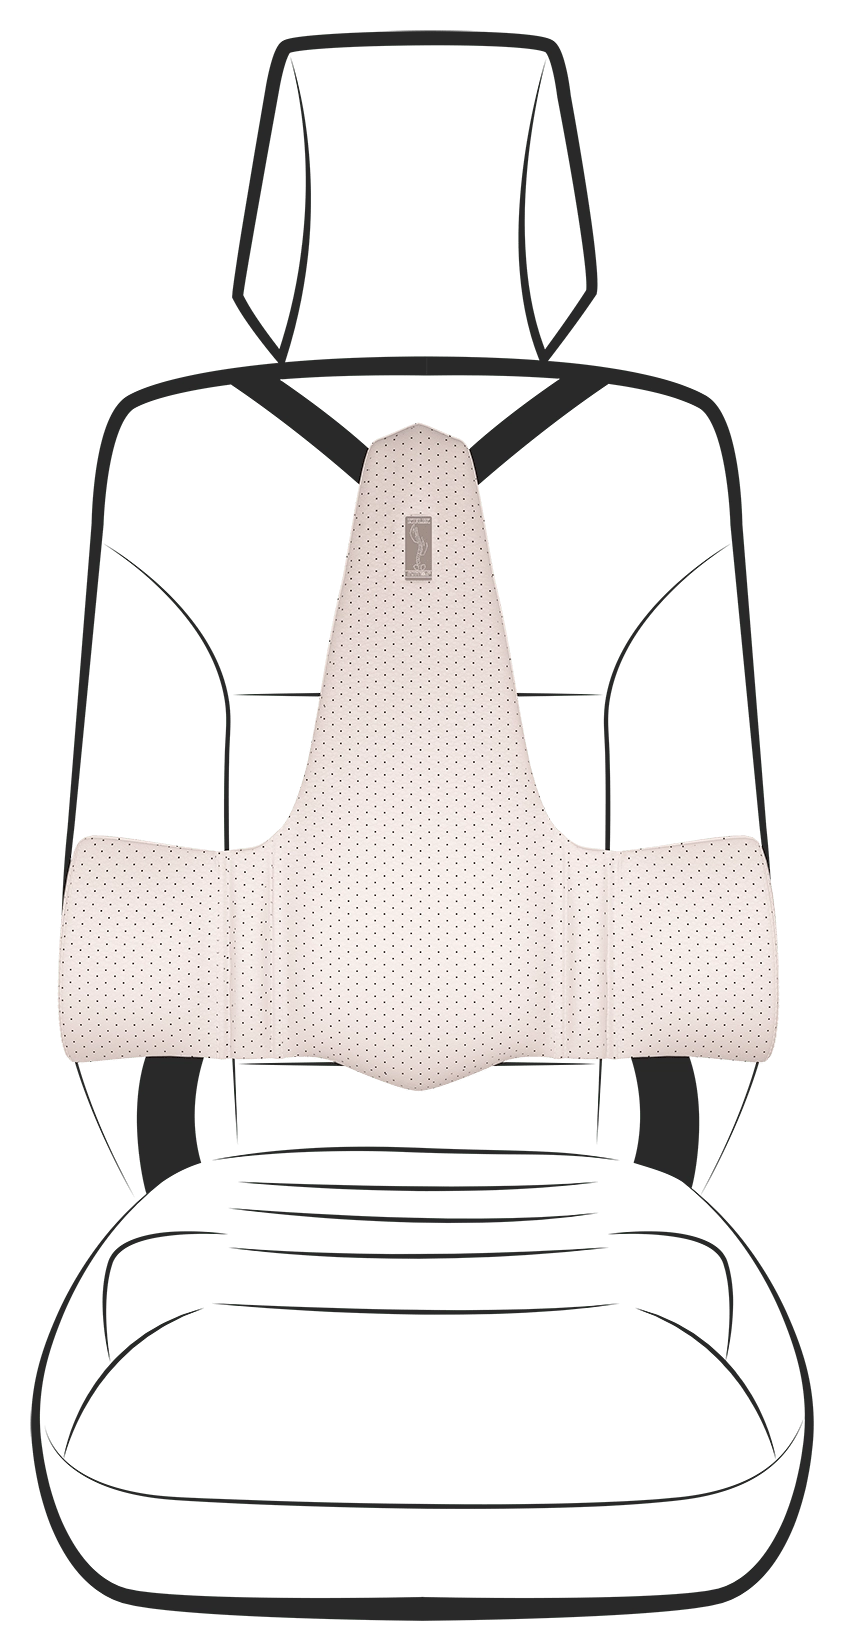 KULIK SYSTEM - New Lumbar Support for Car - Innovative Car Back Support -  Car Seat Cushions for Lower Back - Lower Back Pillow for Car - Patented